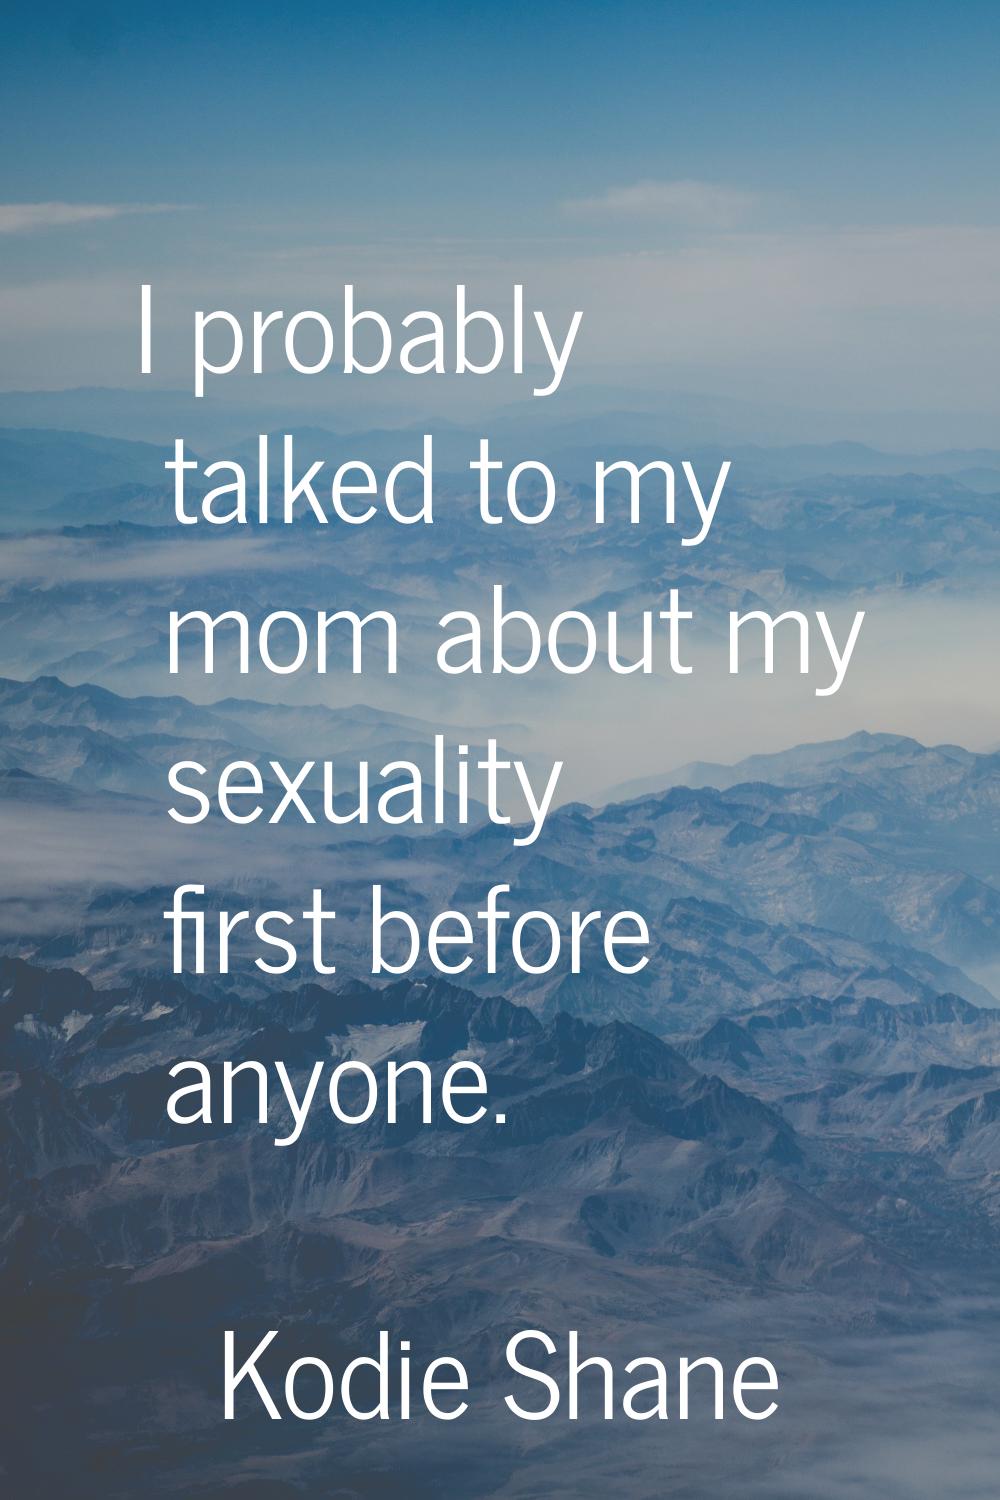 I probably talked to my mom about my sexuality first before anyone.